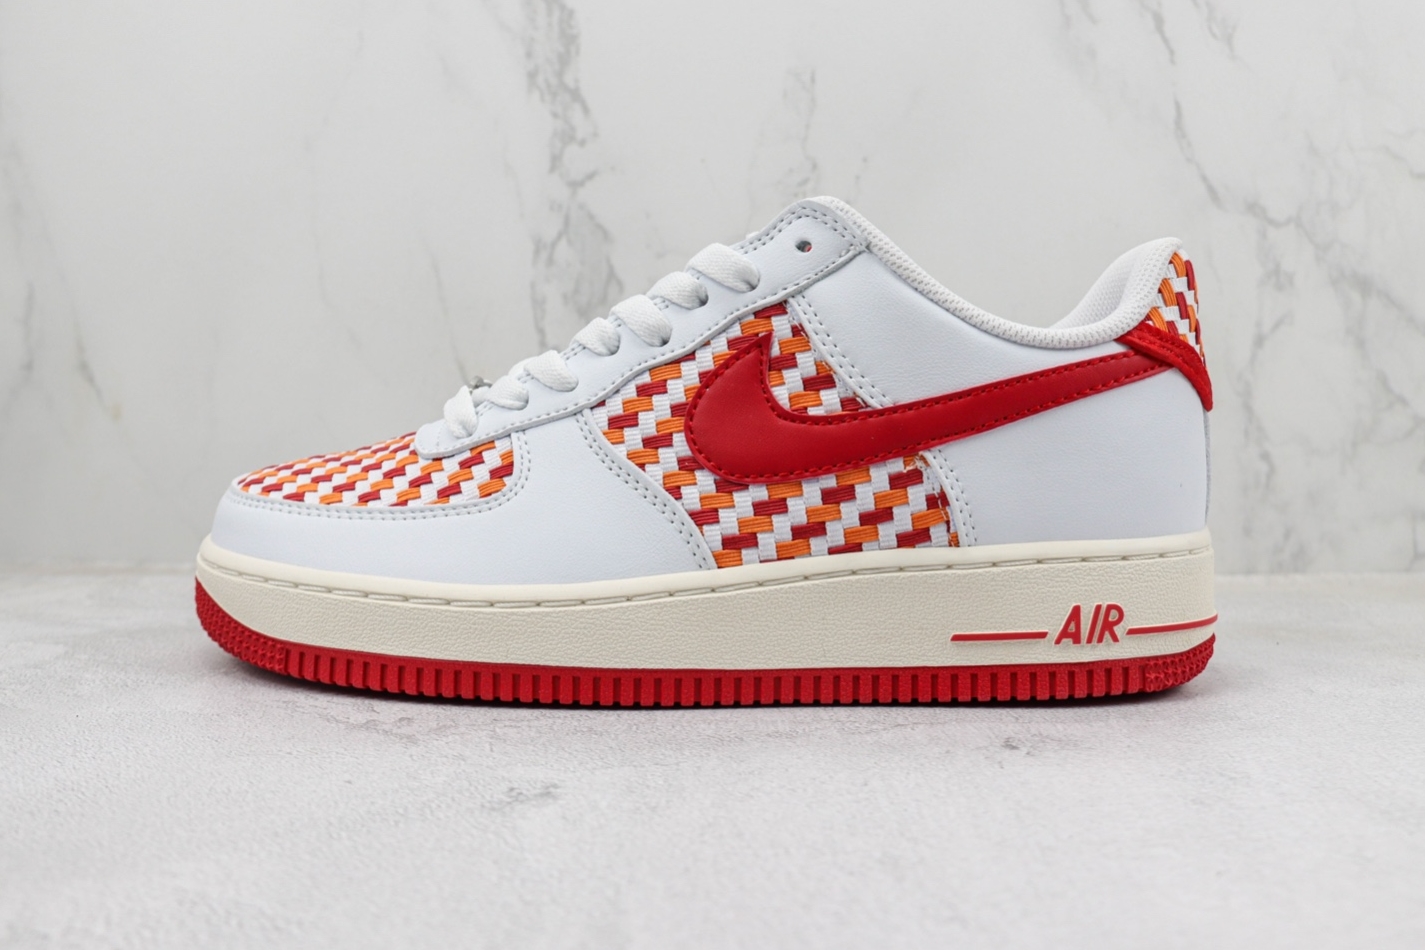 Nike Air Force 1 07 Low White Red Orange DM1060-161 - Stylish & Classic Sneakers